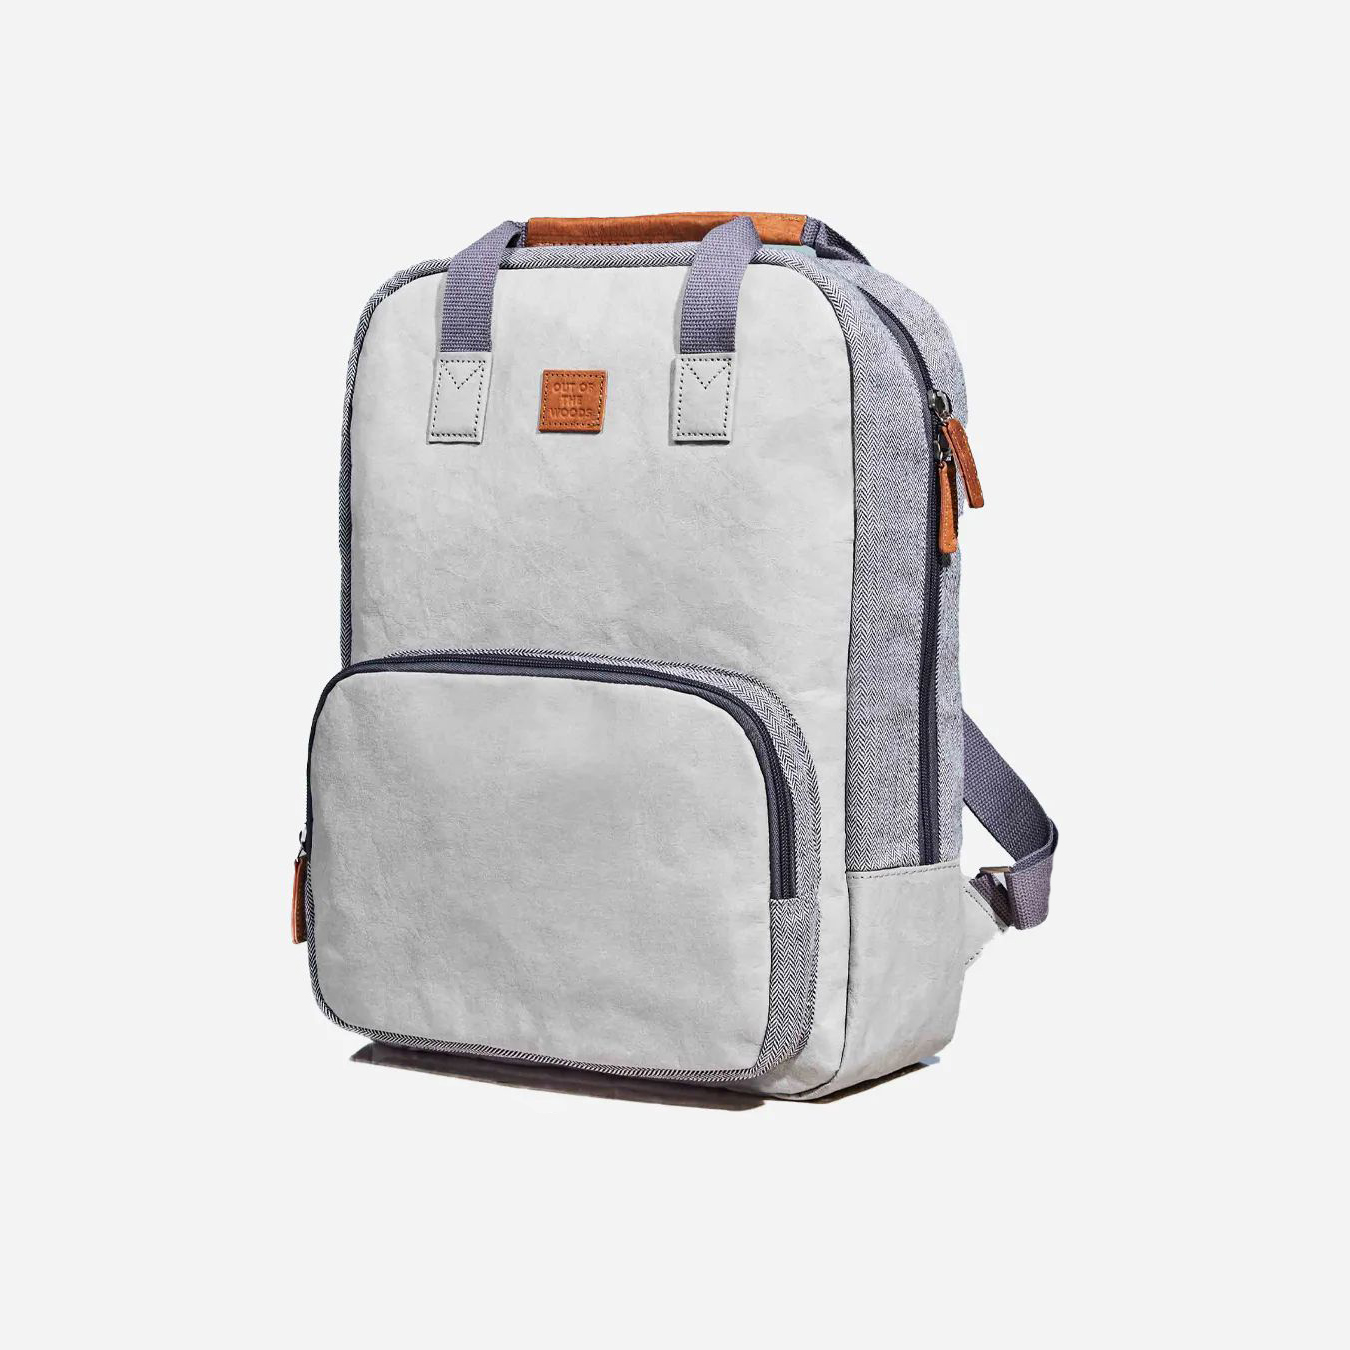 Out Of The Woods Backpack Sac à Dos made of washable paper